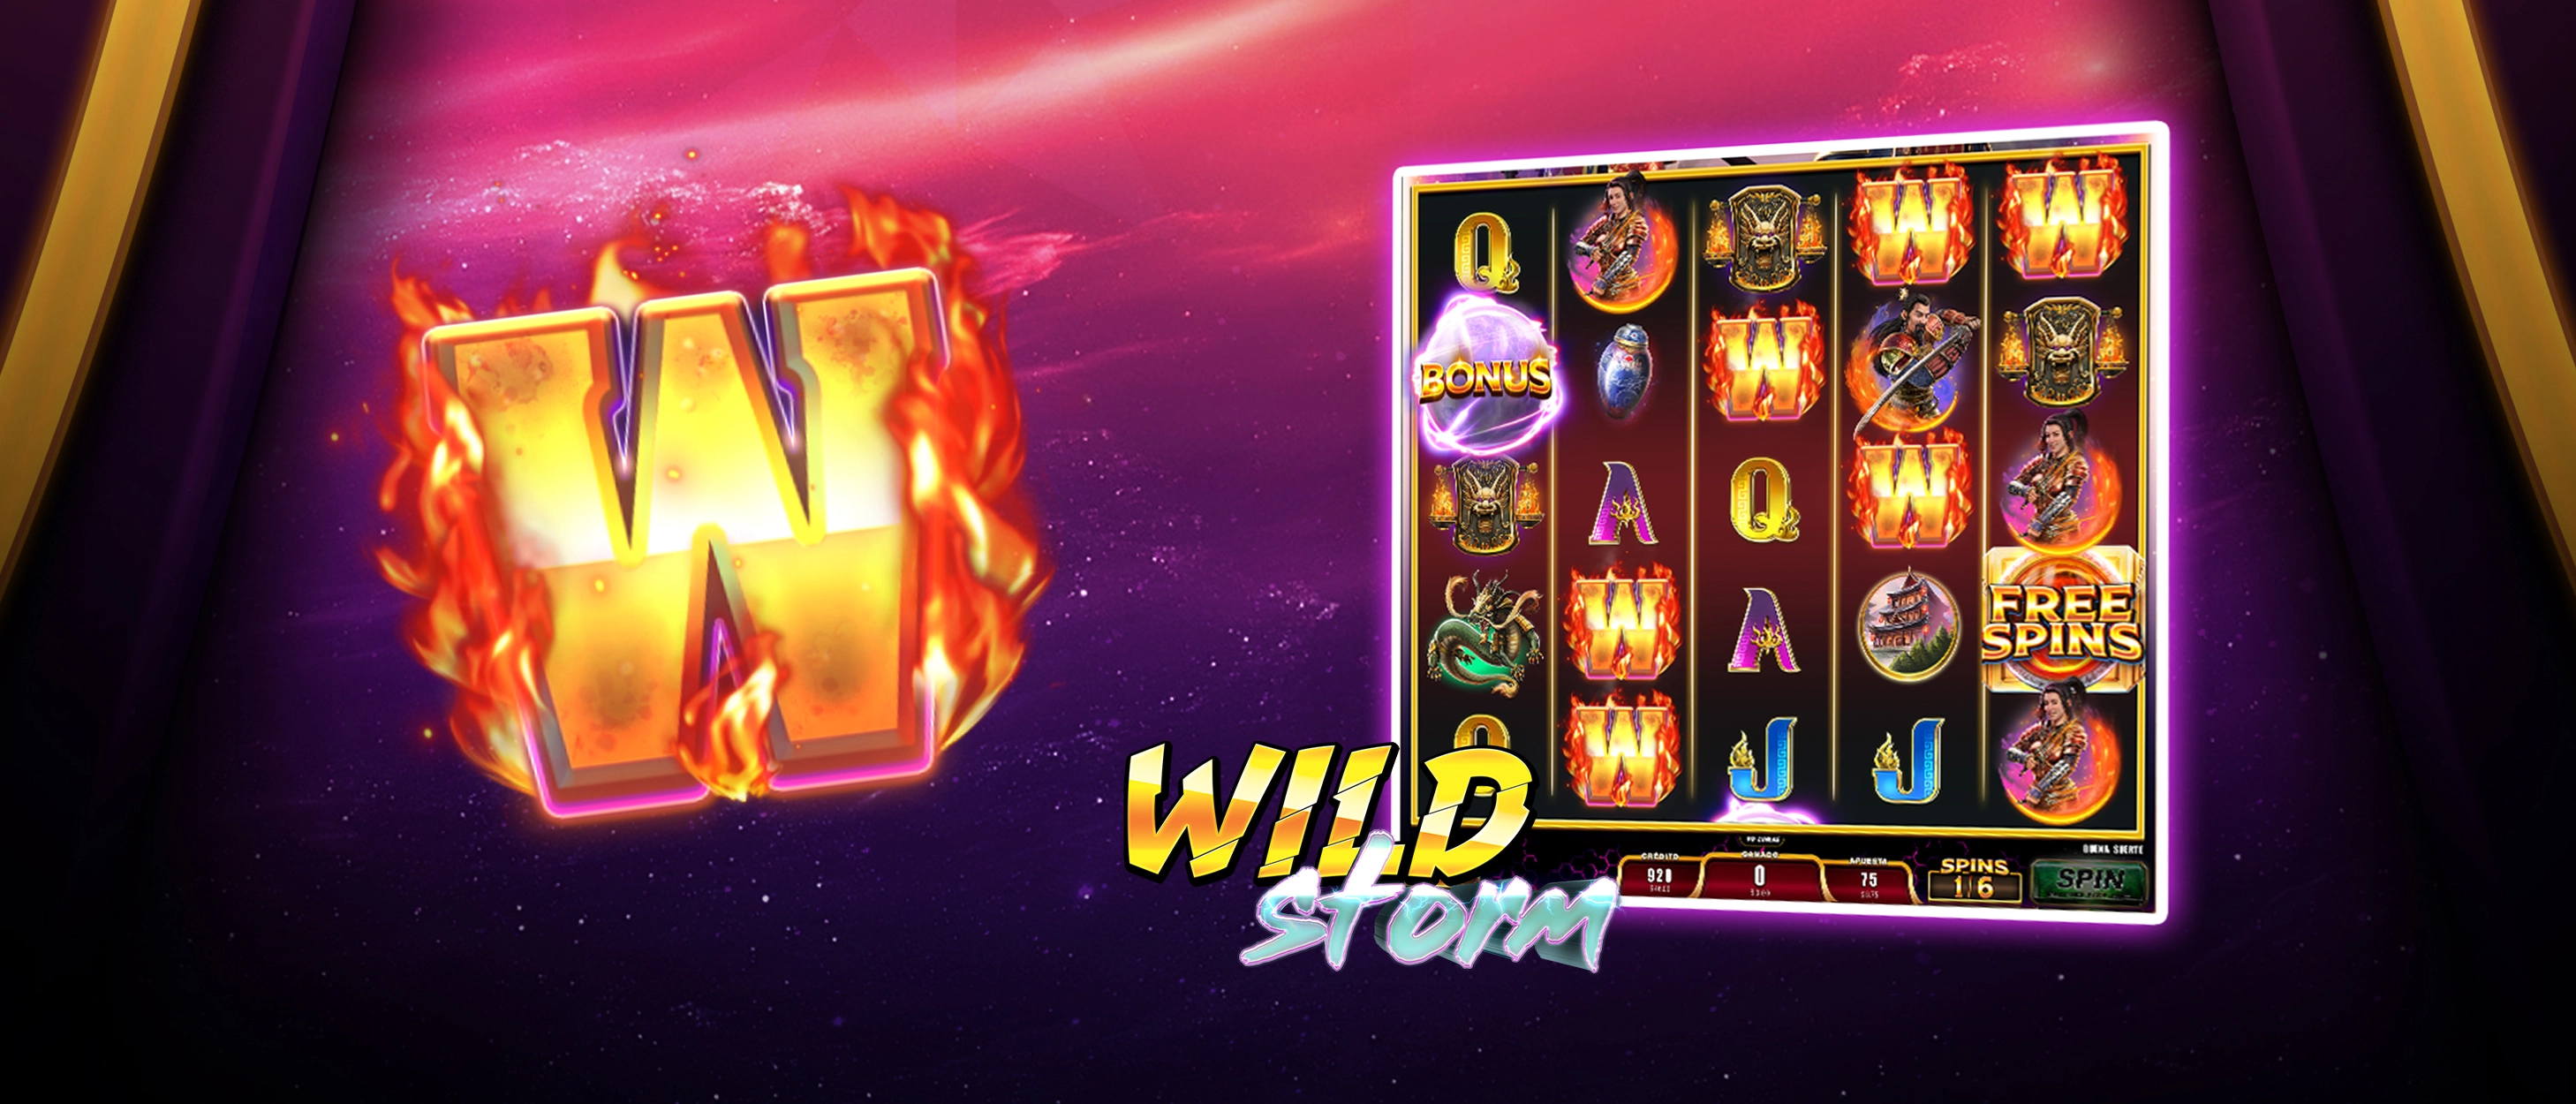 This image presents the Wild symbol of the Wu Long Empire slots game on the left and a game screen on the right with the Wild Storm game feature active and simulating a big casino win.